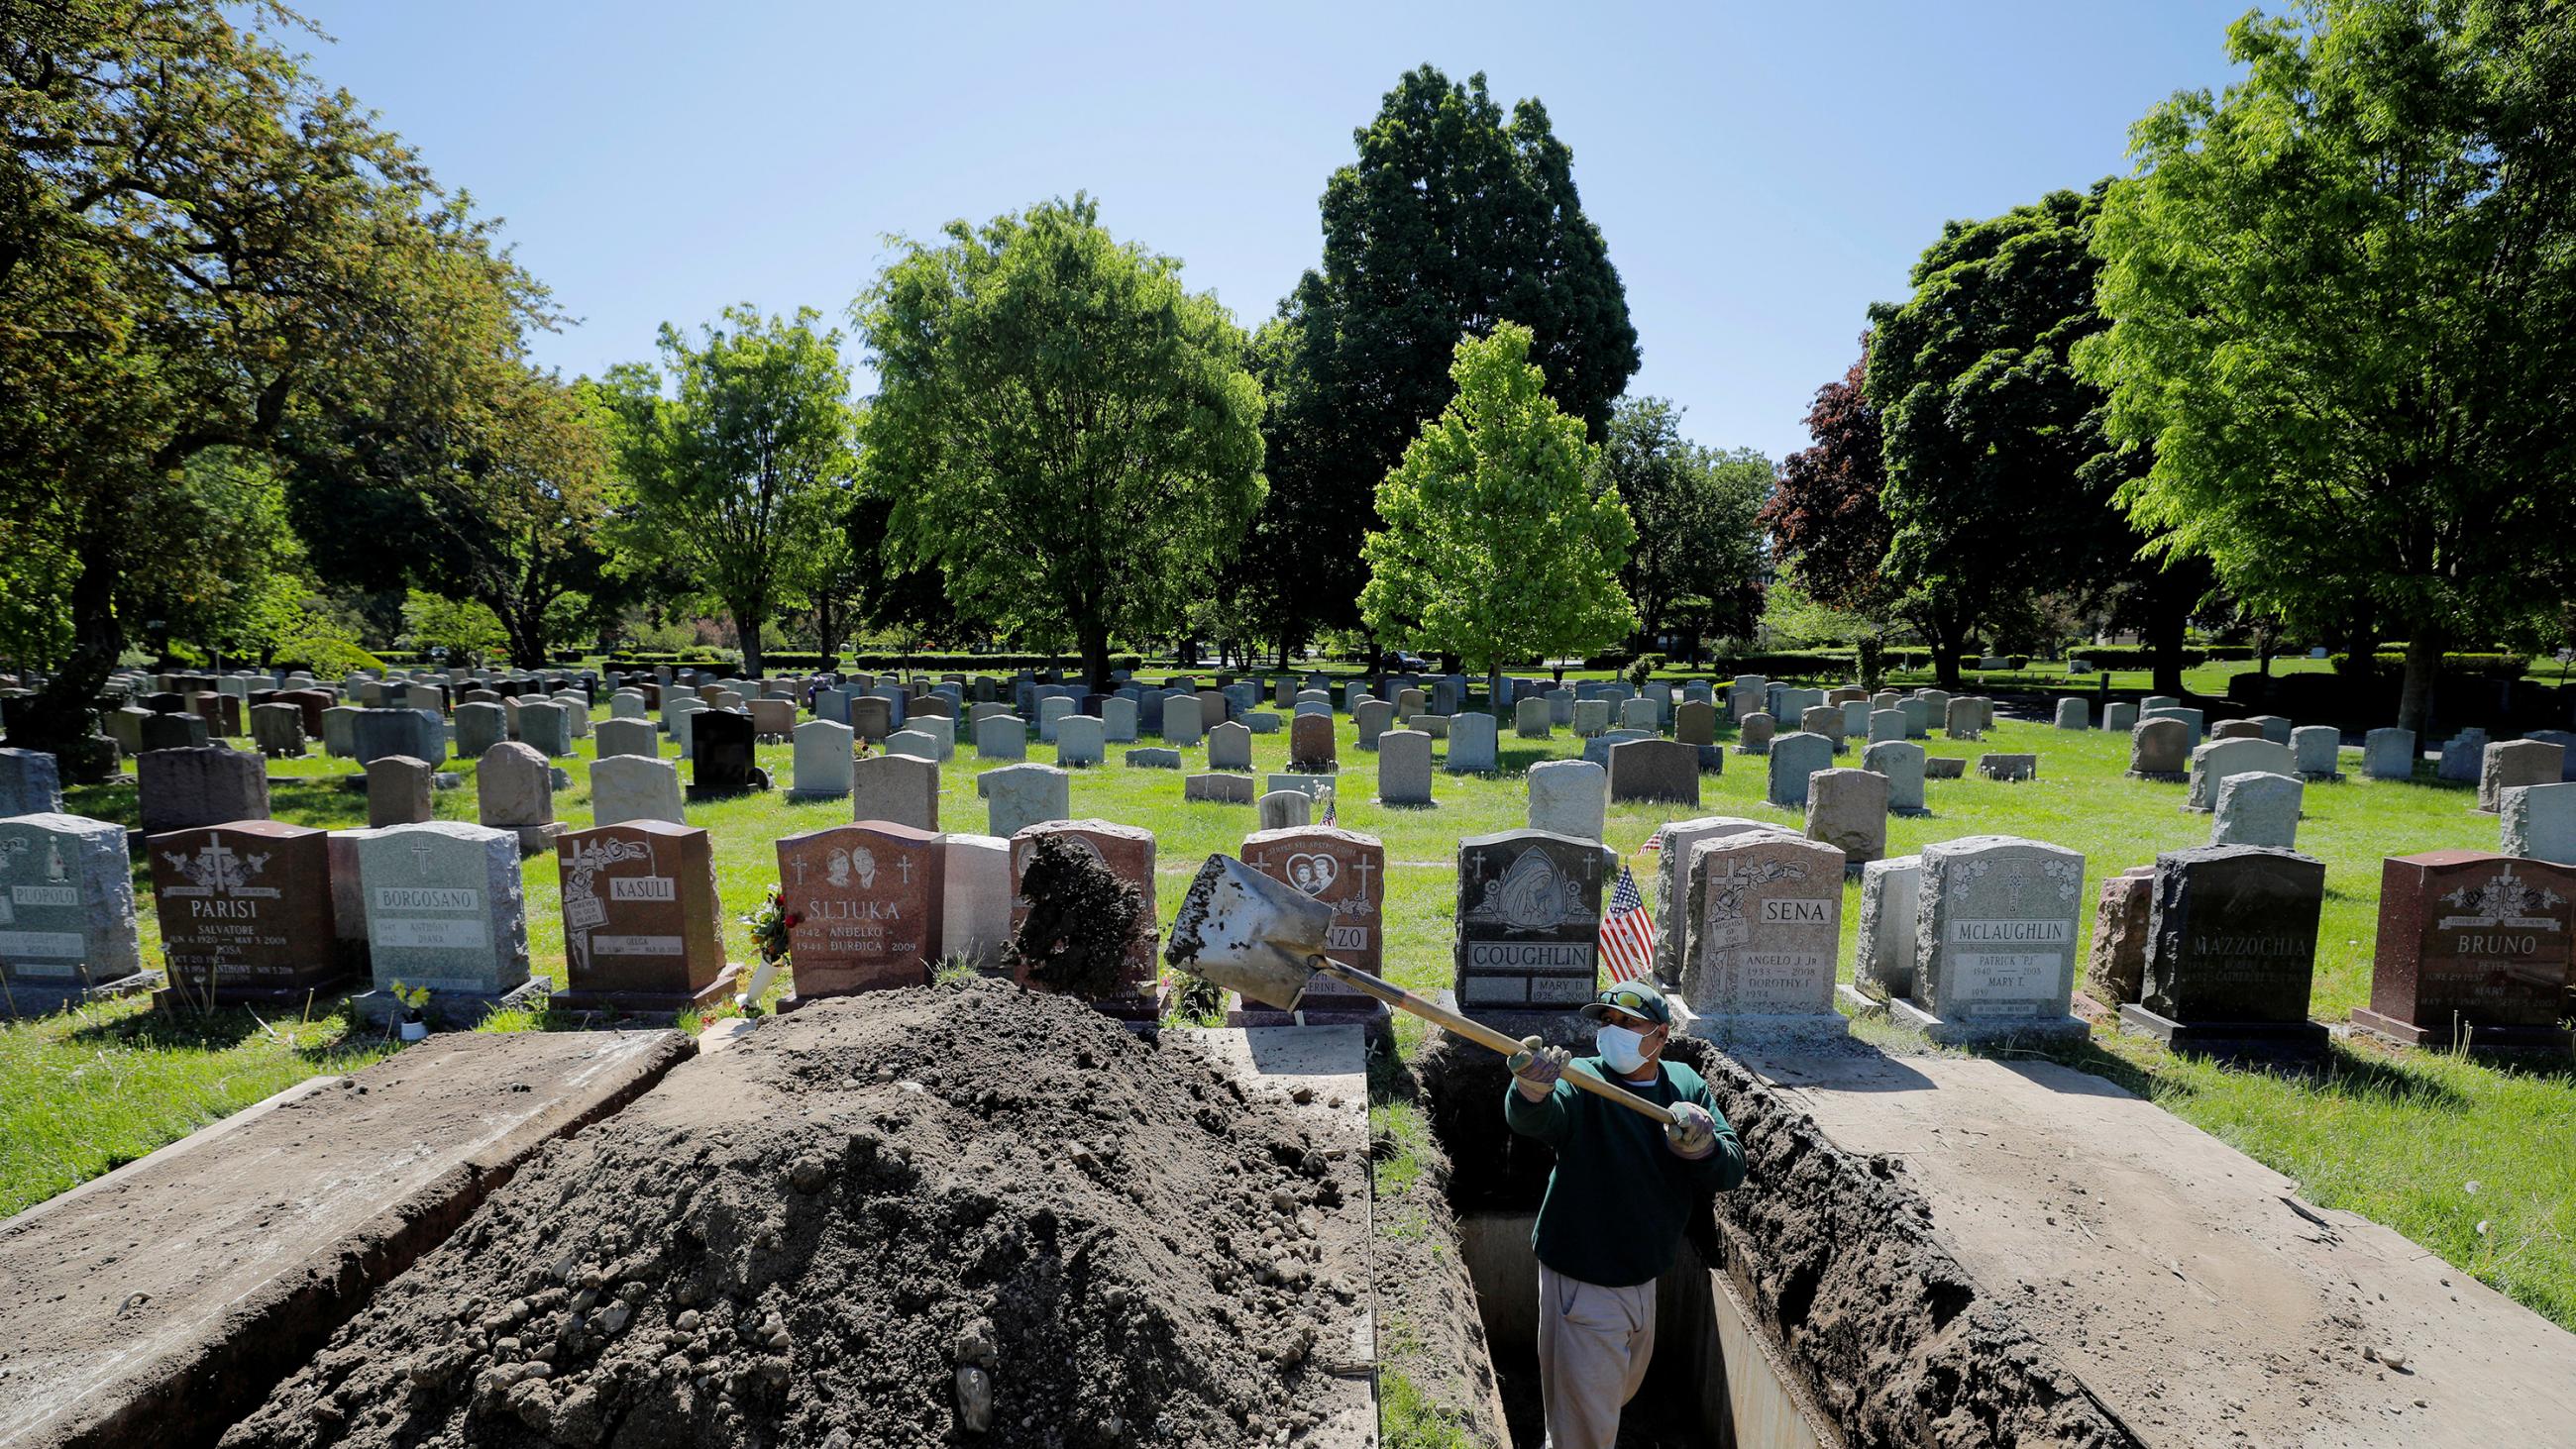 The image shows a cemetery with a grave freshly dug. 